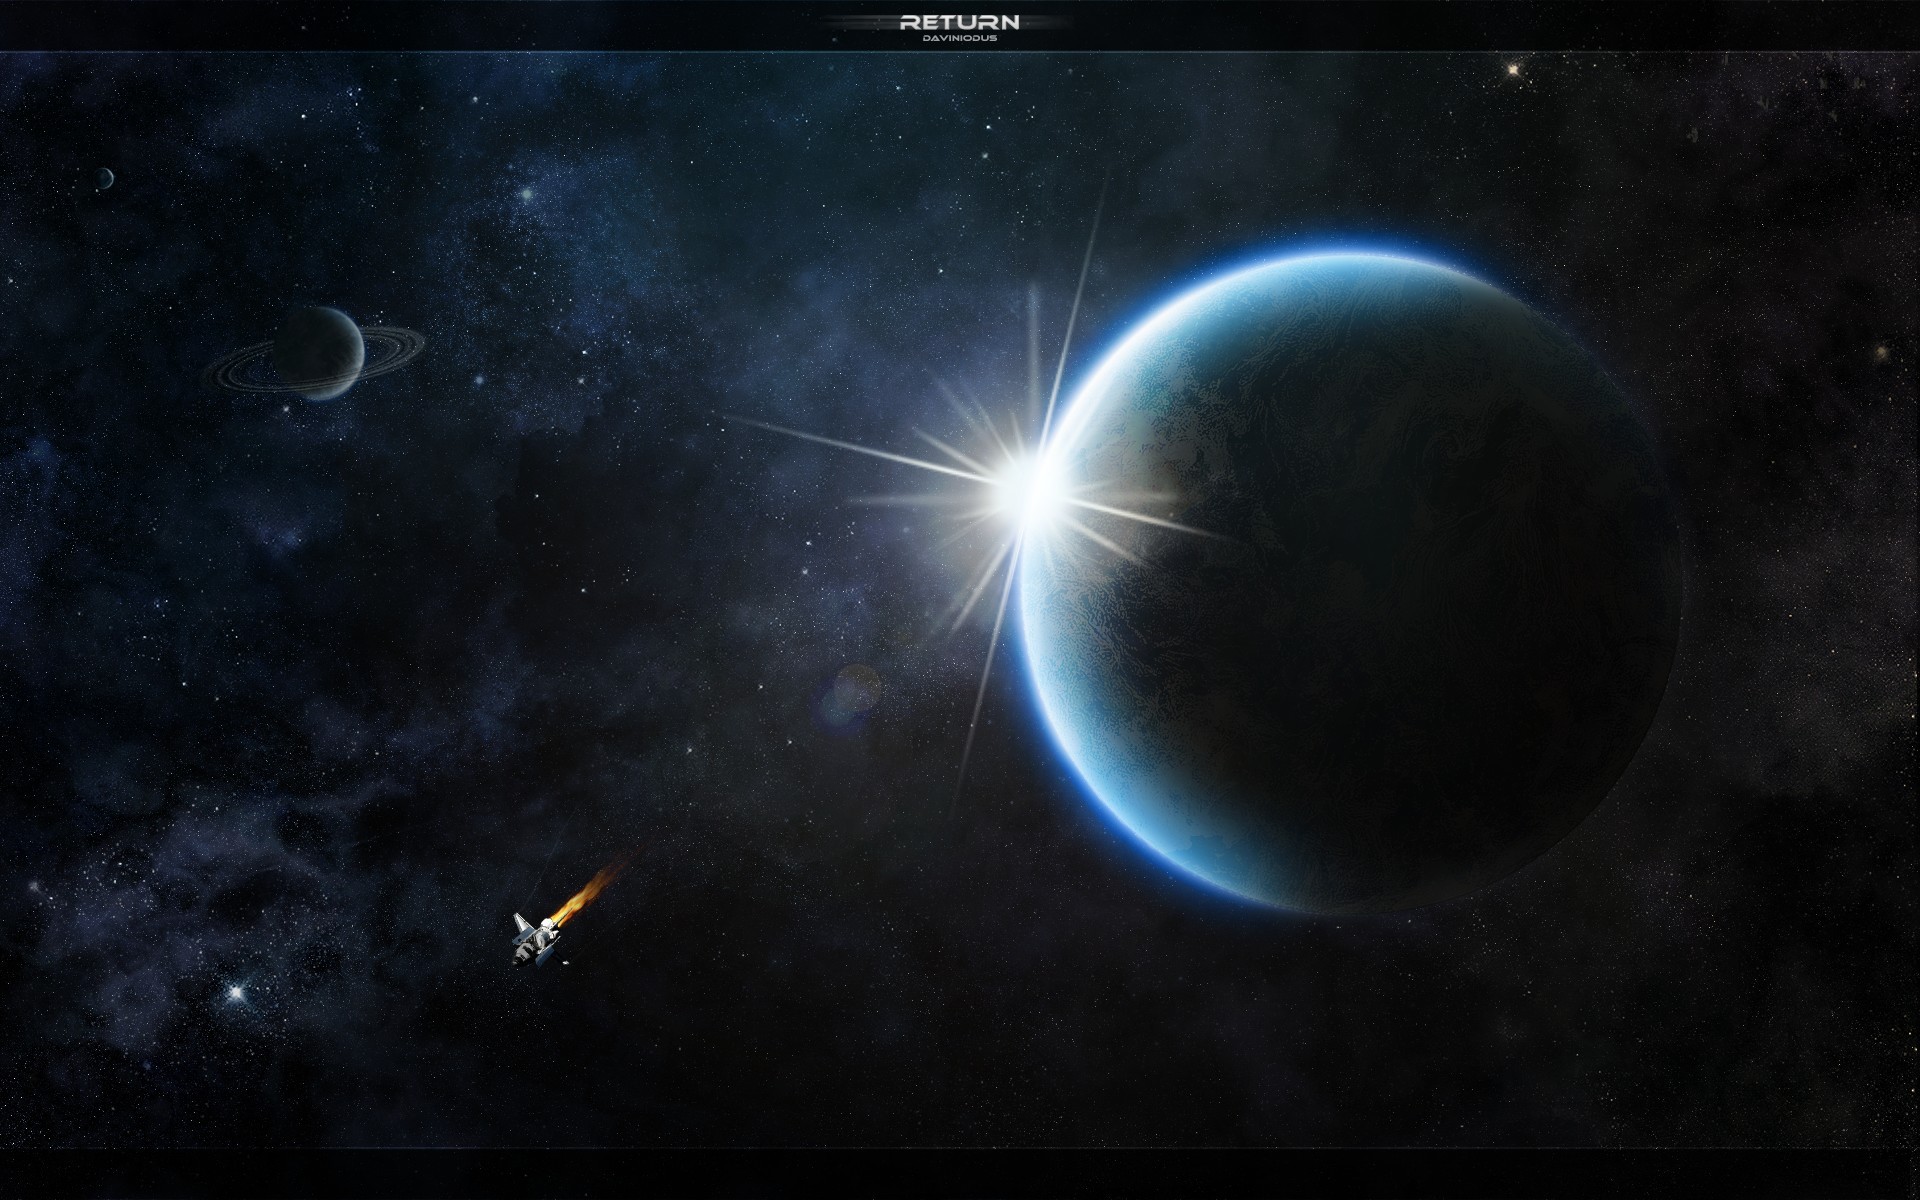 Download wallpapers download 1680x1050 science fiction wallpaper ...